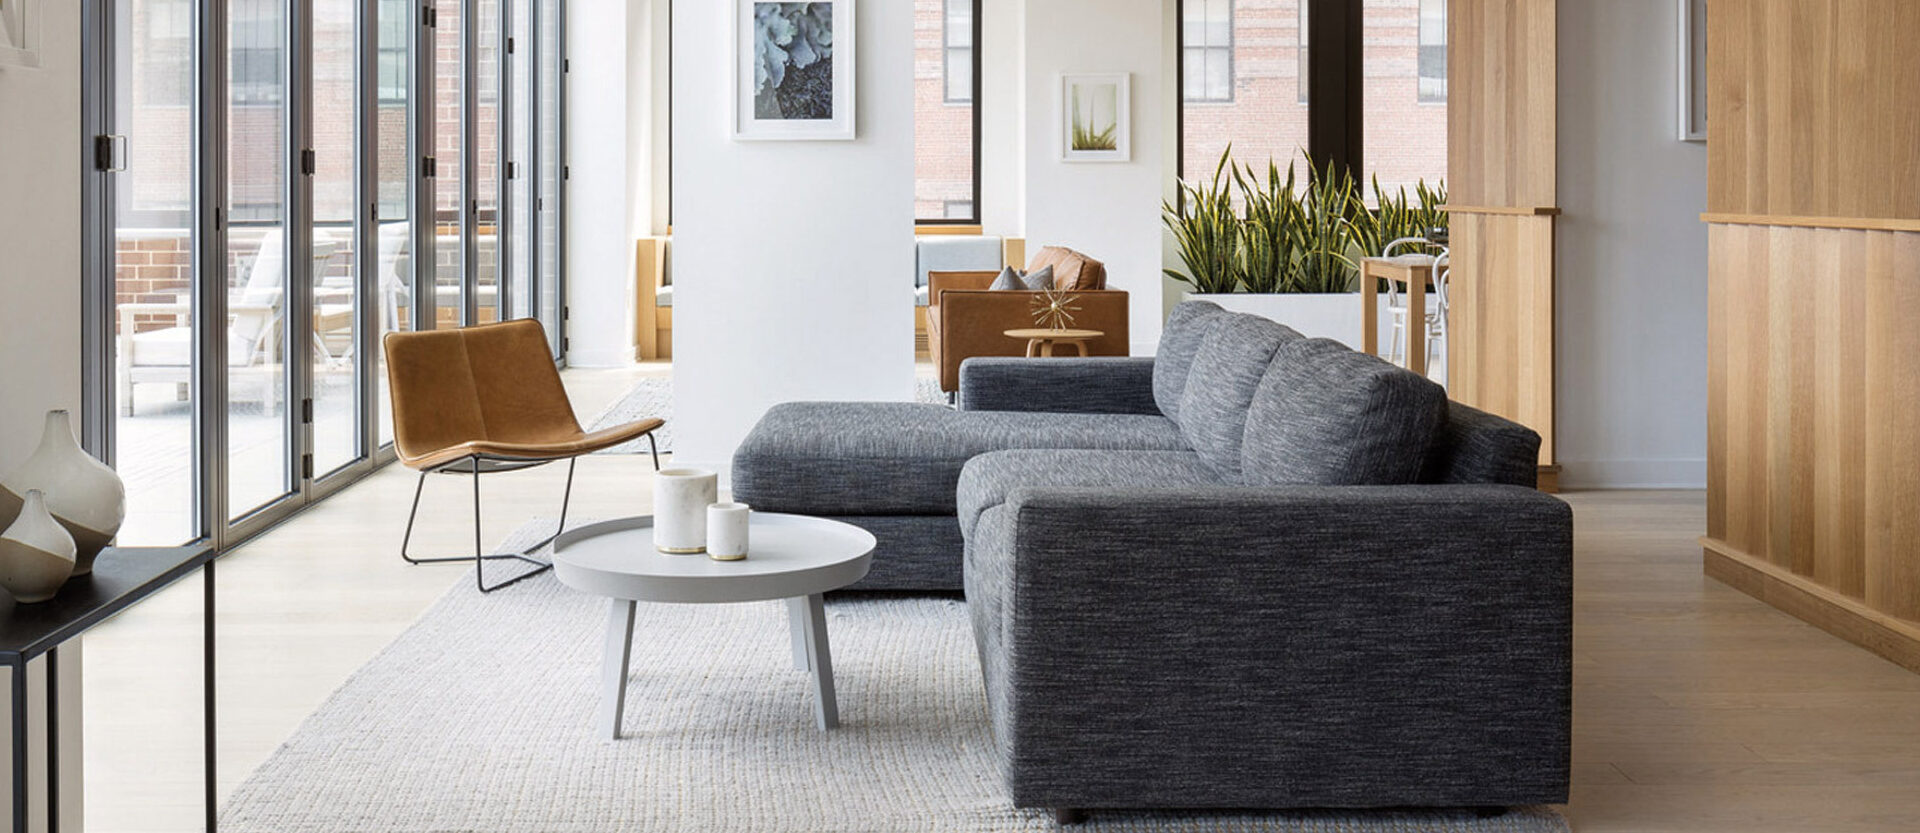 Bright, contemporary living space with minimalist design featuring clean lines. A dark grey sofa anchors the room against a large beige area rug, flanked by wooden bookshelves and modern leather armchairs. Natural light floods in through floor-to-ceiling windows, enhancing the warmth of the wooden accents.